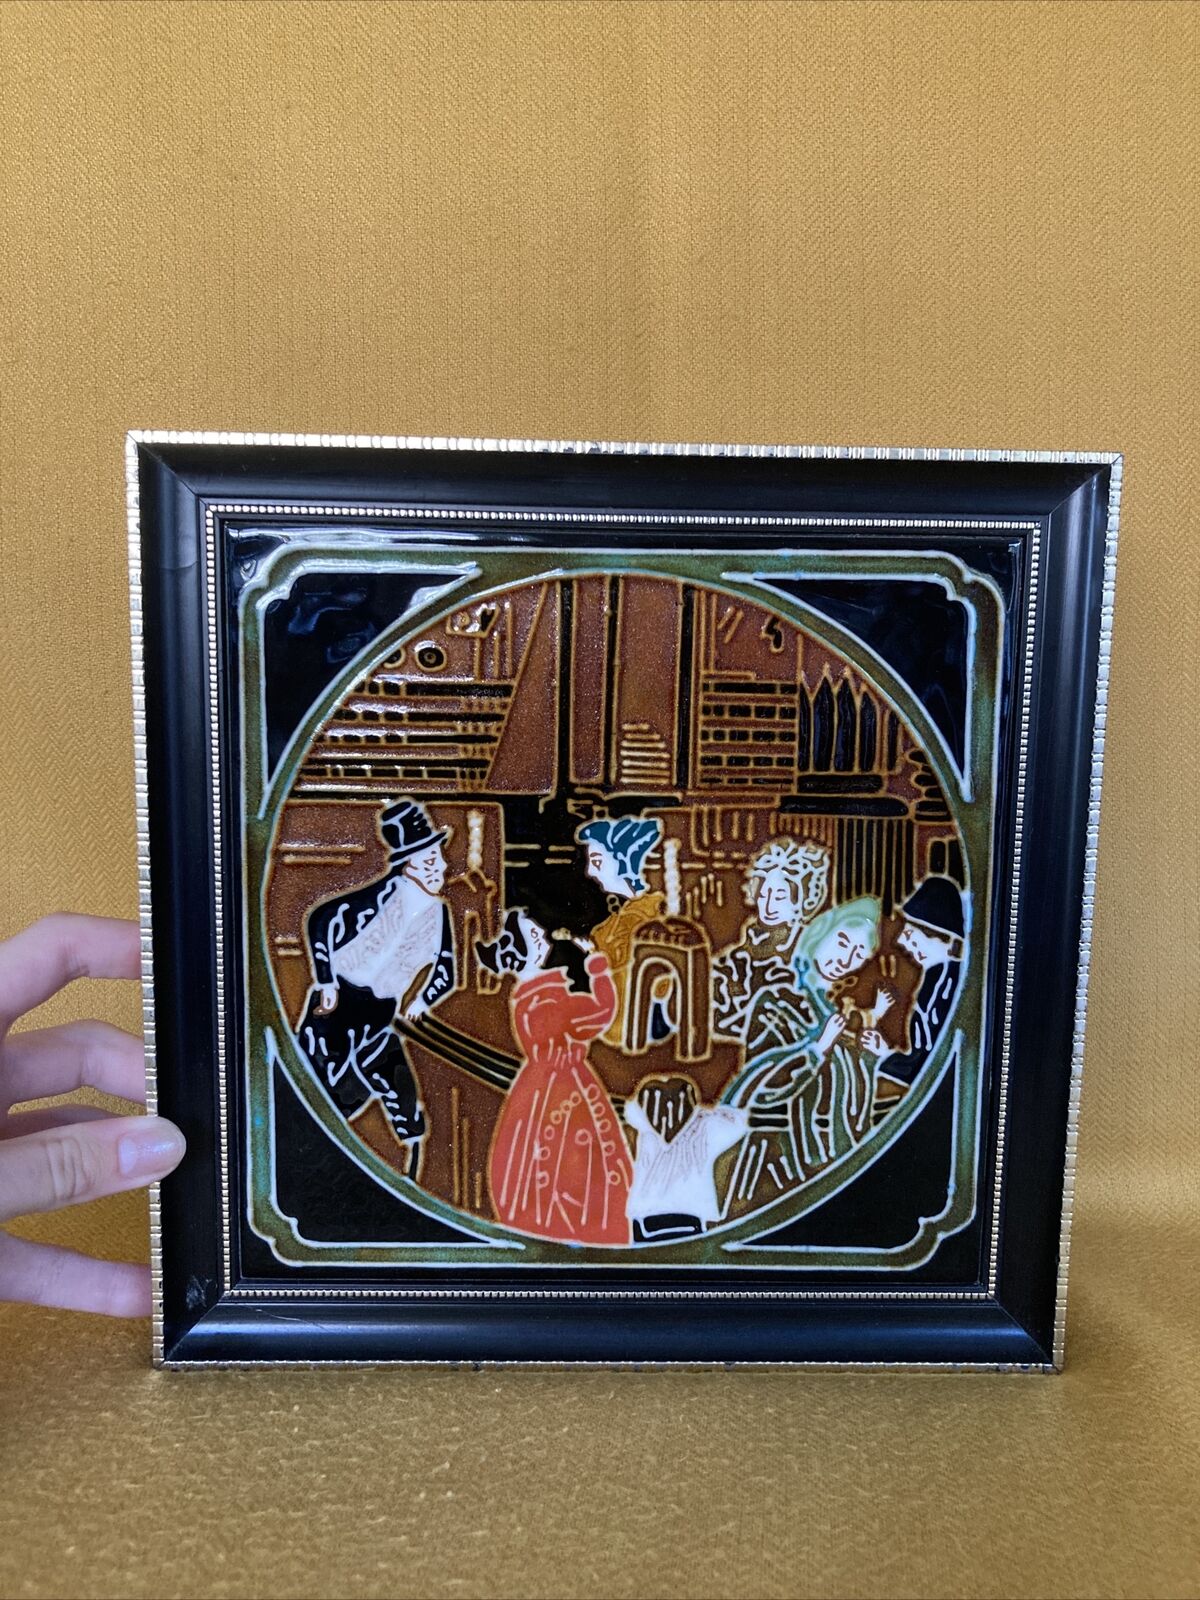 Maw & Co Bar Scene Tile With a Wooden Surrund Frame Black and Gold 1974+